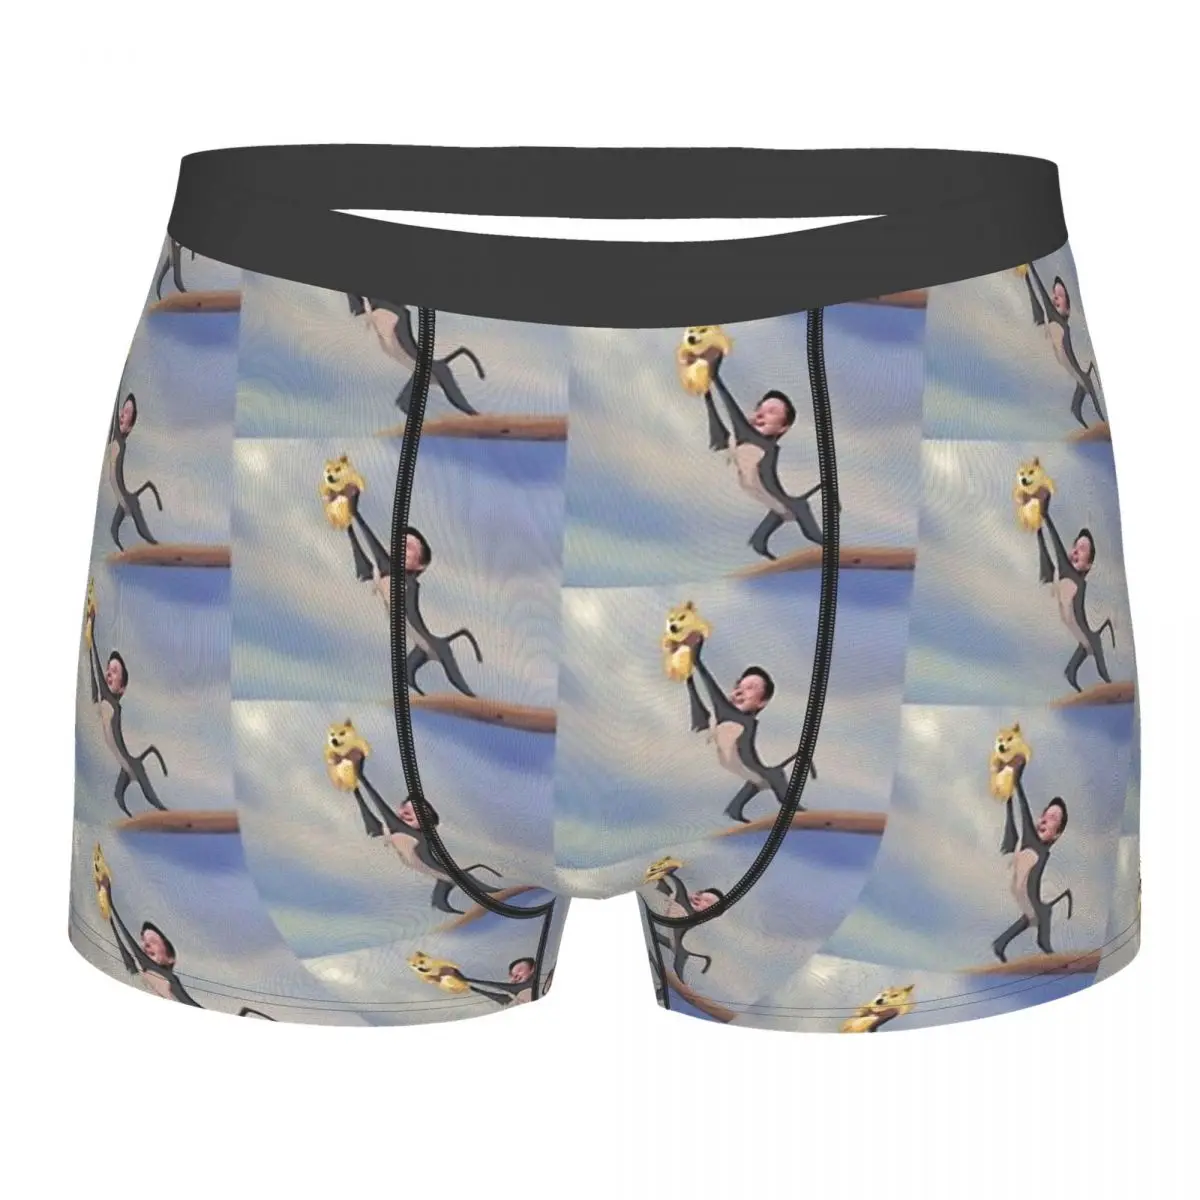 

Dogecoin Doge Coin Cryptocurrency Fan Art Underpants Homme Panties Men's Underwear Print Shorts Boxer Briefs